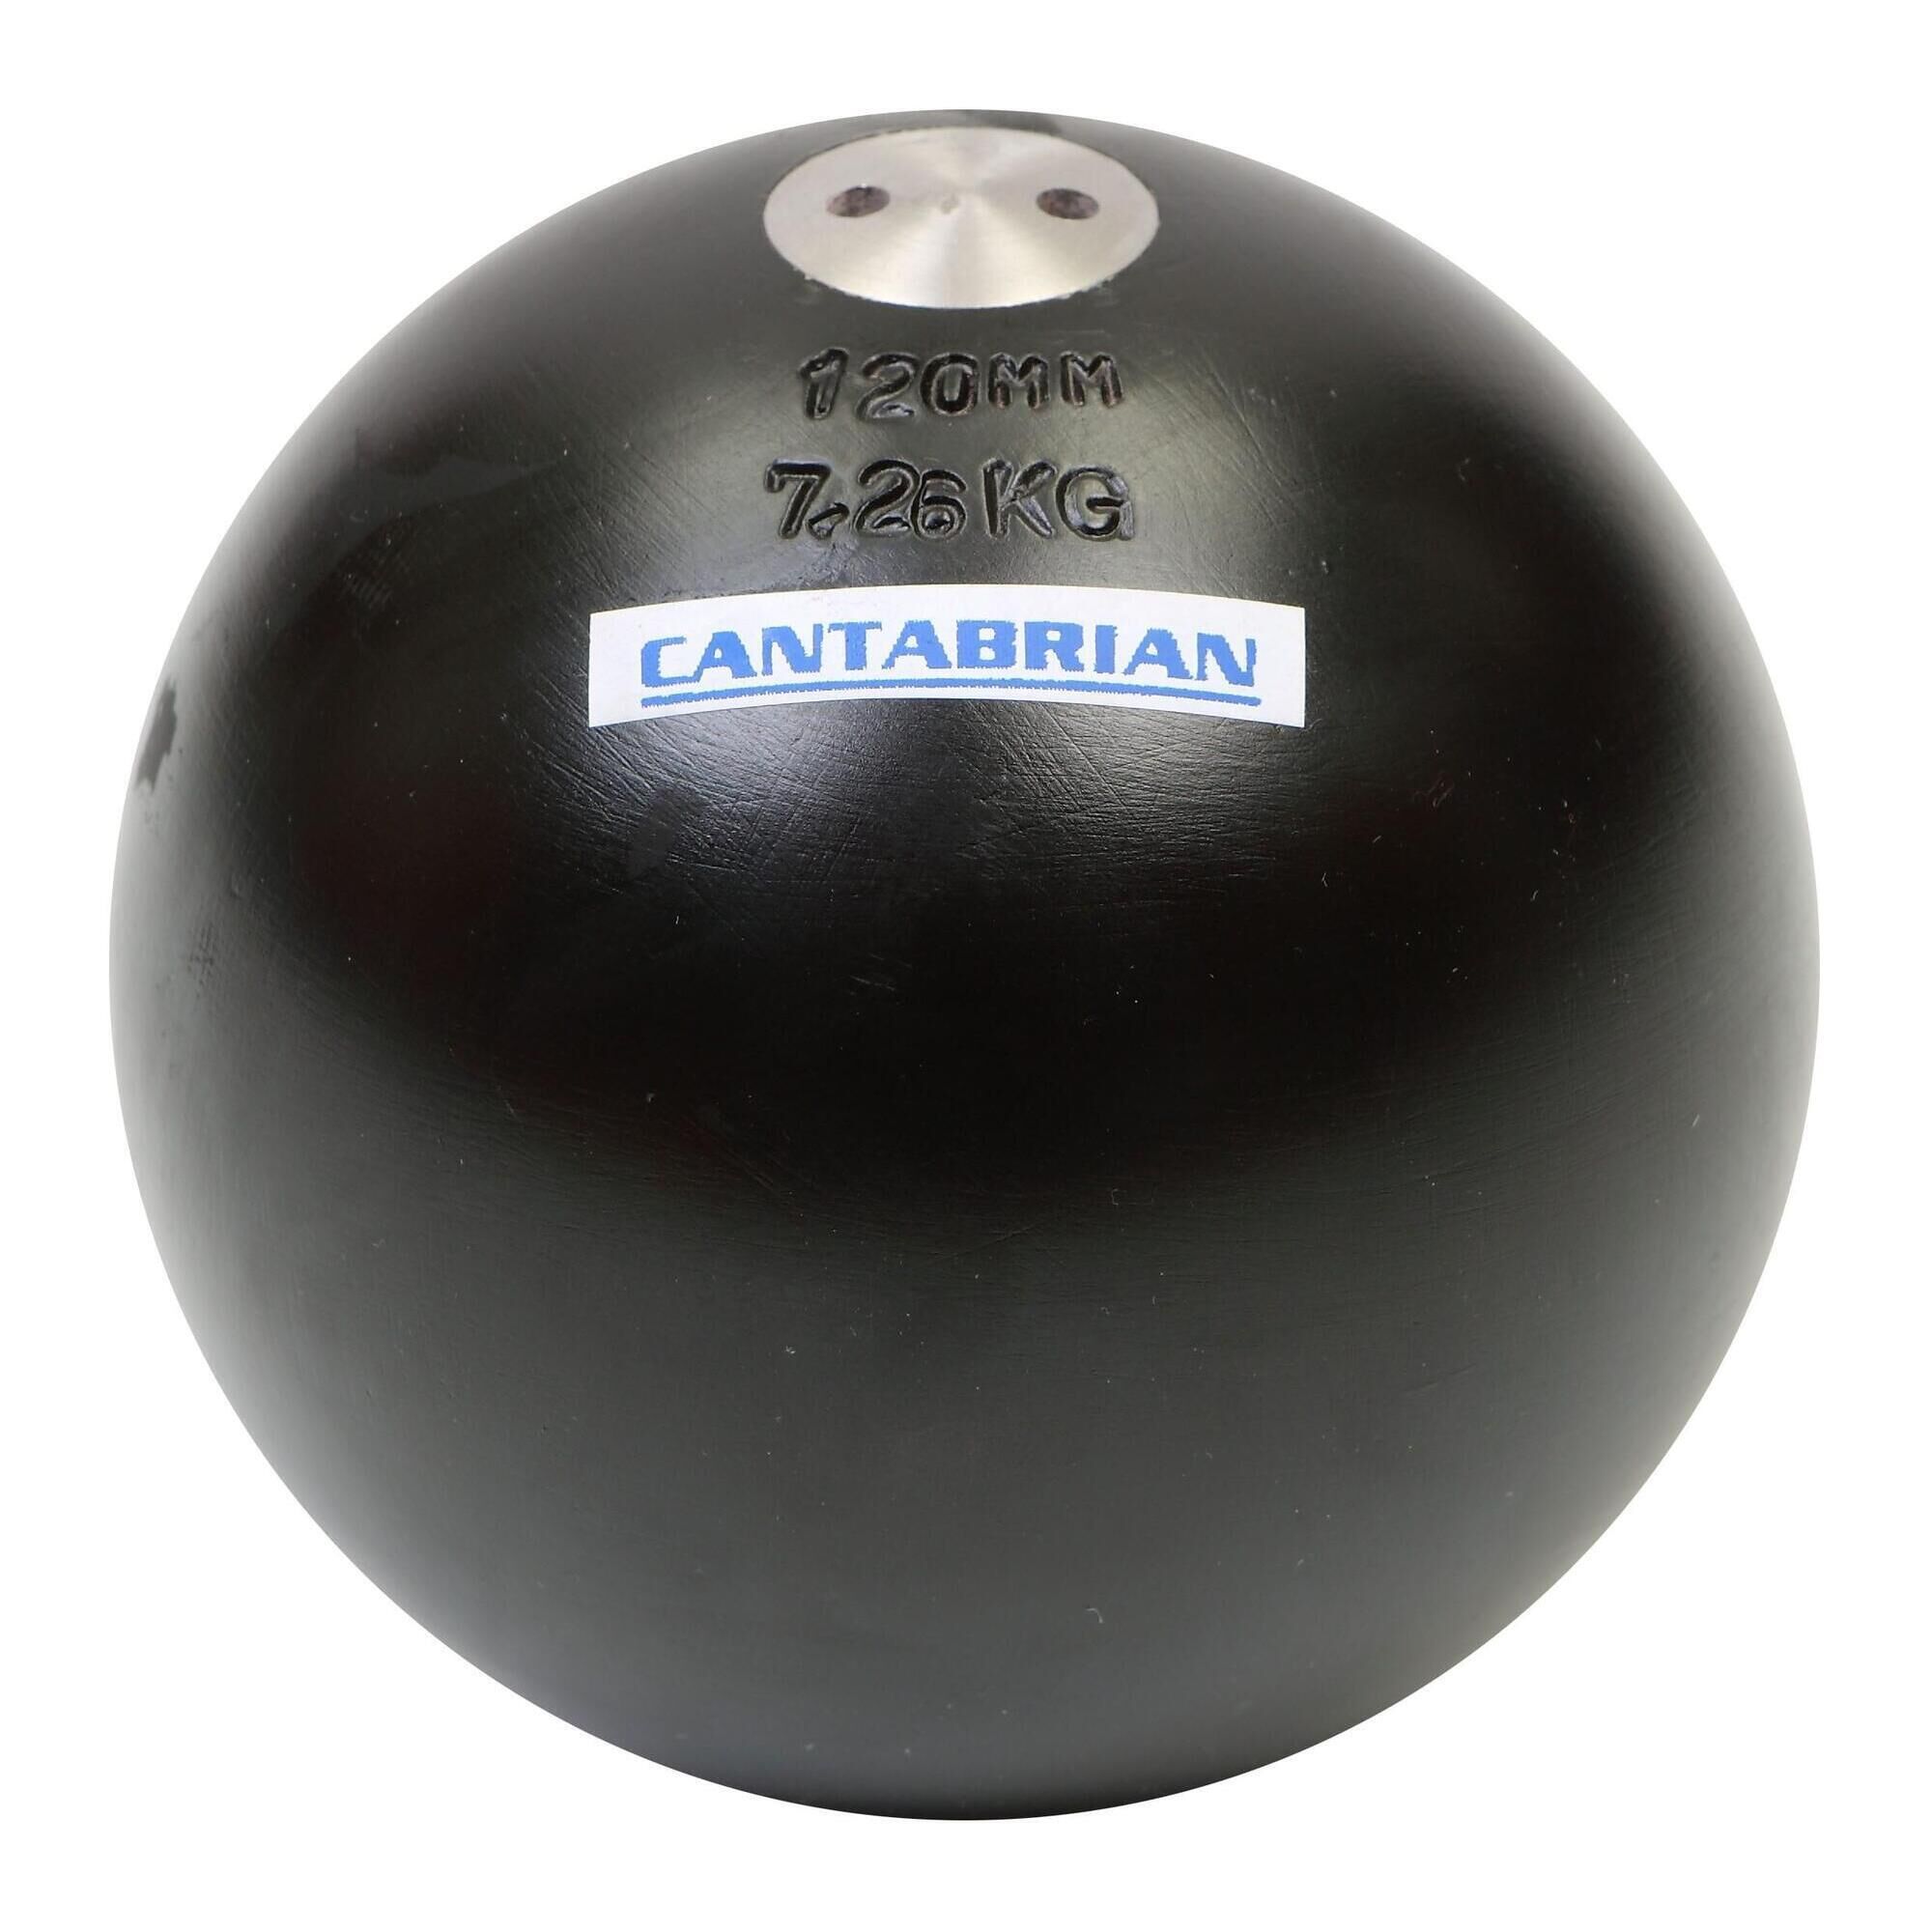 CANTABRIAN Cantabrian Olympic Steel Shot Puts - 100mm dia